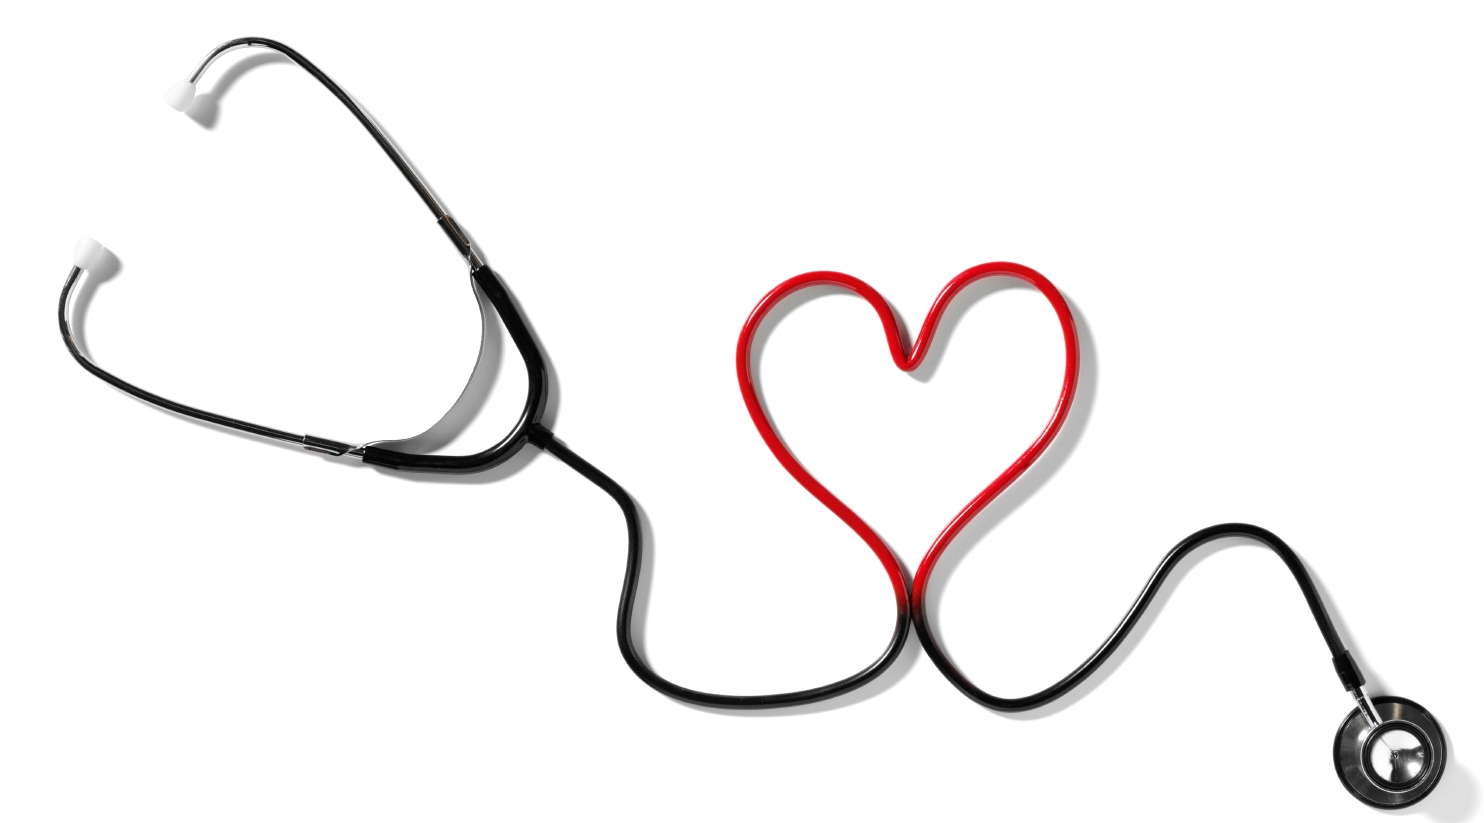 Top stethoscope and heart images for clip art image #17028